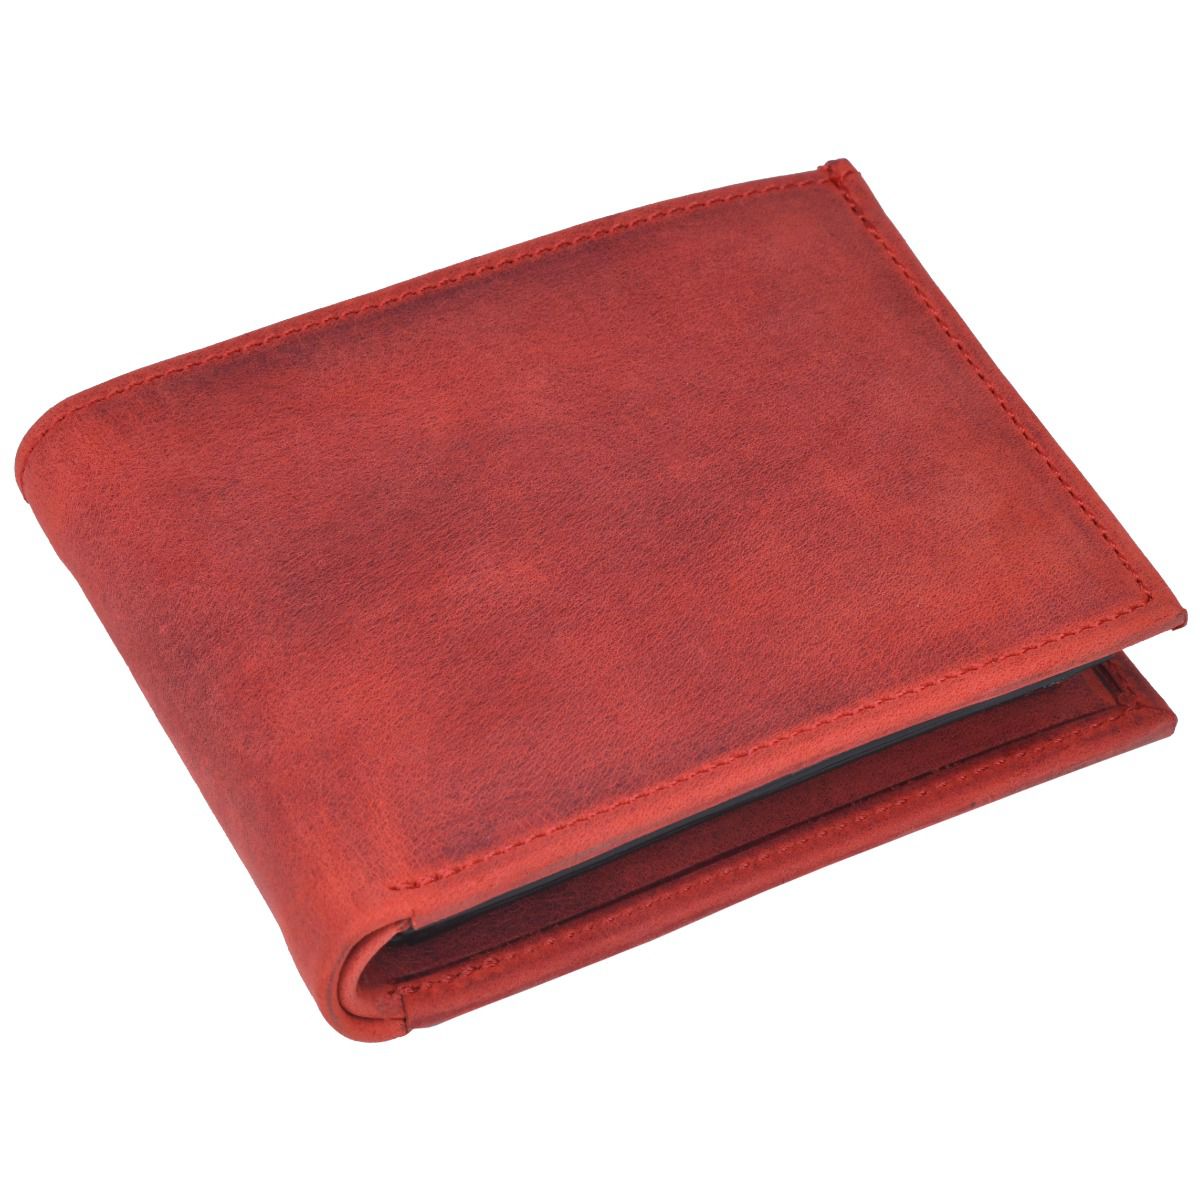 OHM New York Wine Color Vintage Collection Leather Wallets President